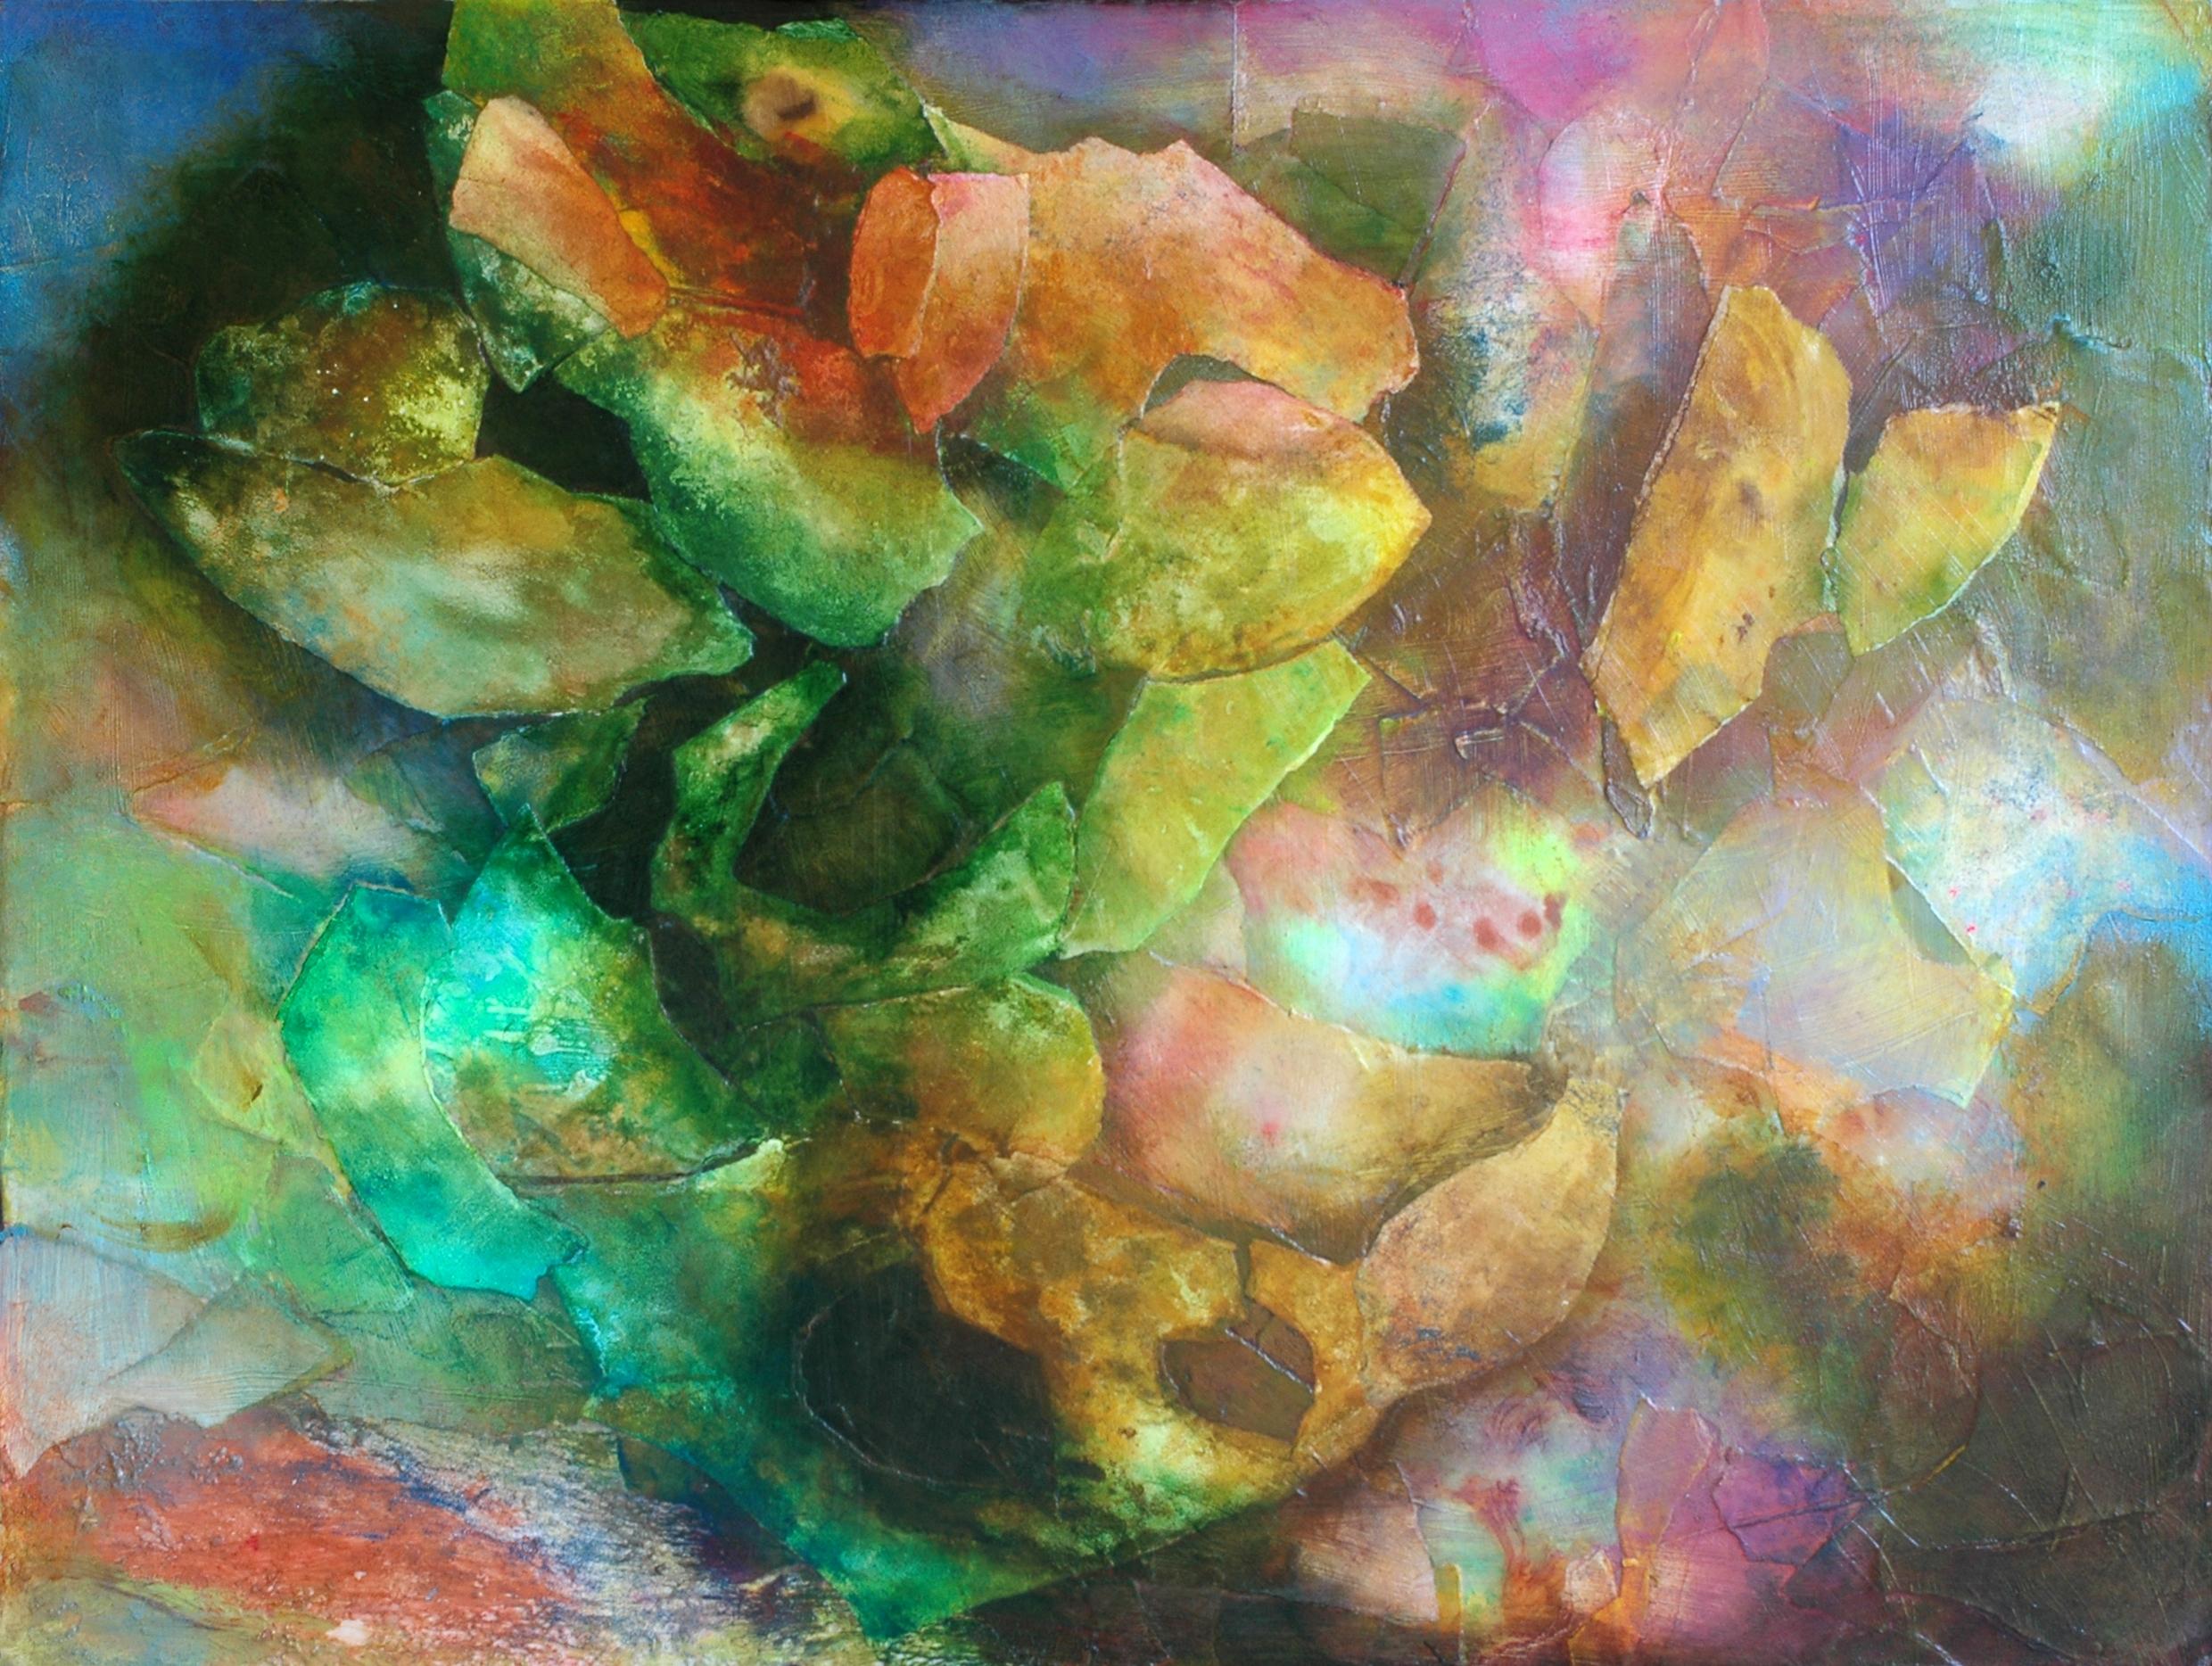 089 Crystal Cave, Mixed Media on Canvas - Mixed Media Art by Anne B Schwartz